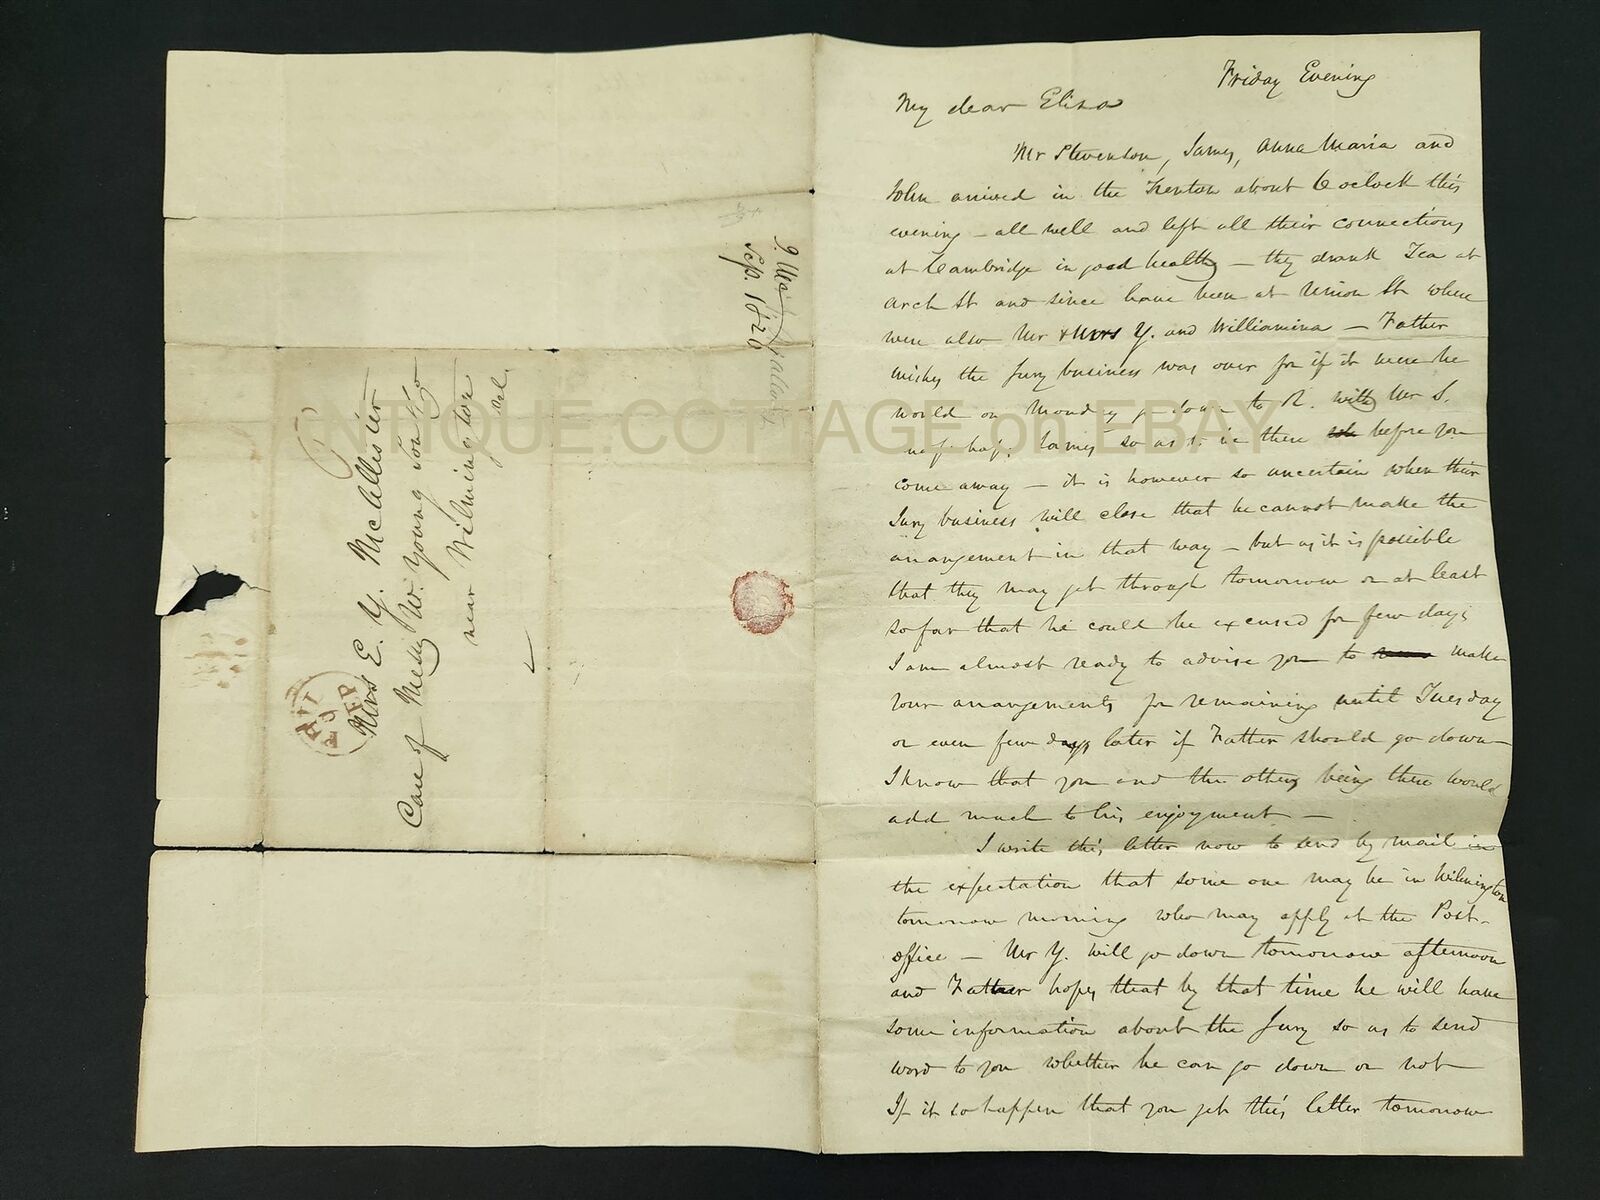 1836 antique STAMPLESS COVER LETTER near wilmington de McALLISTER to wife